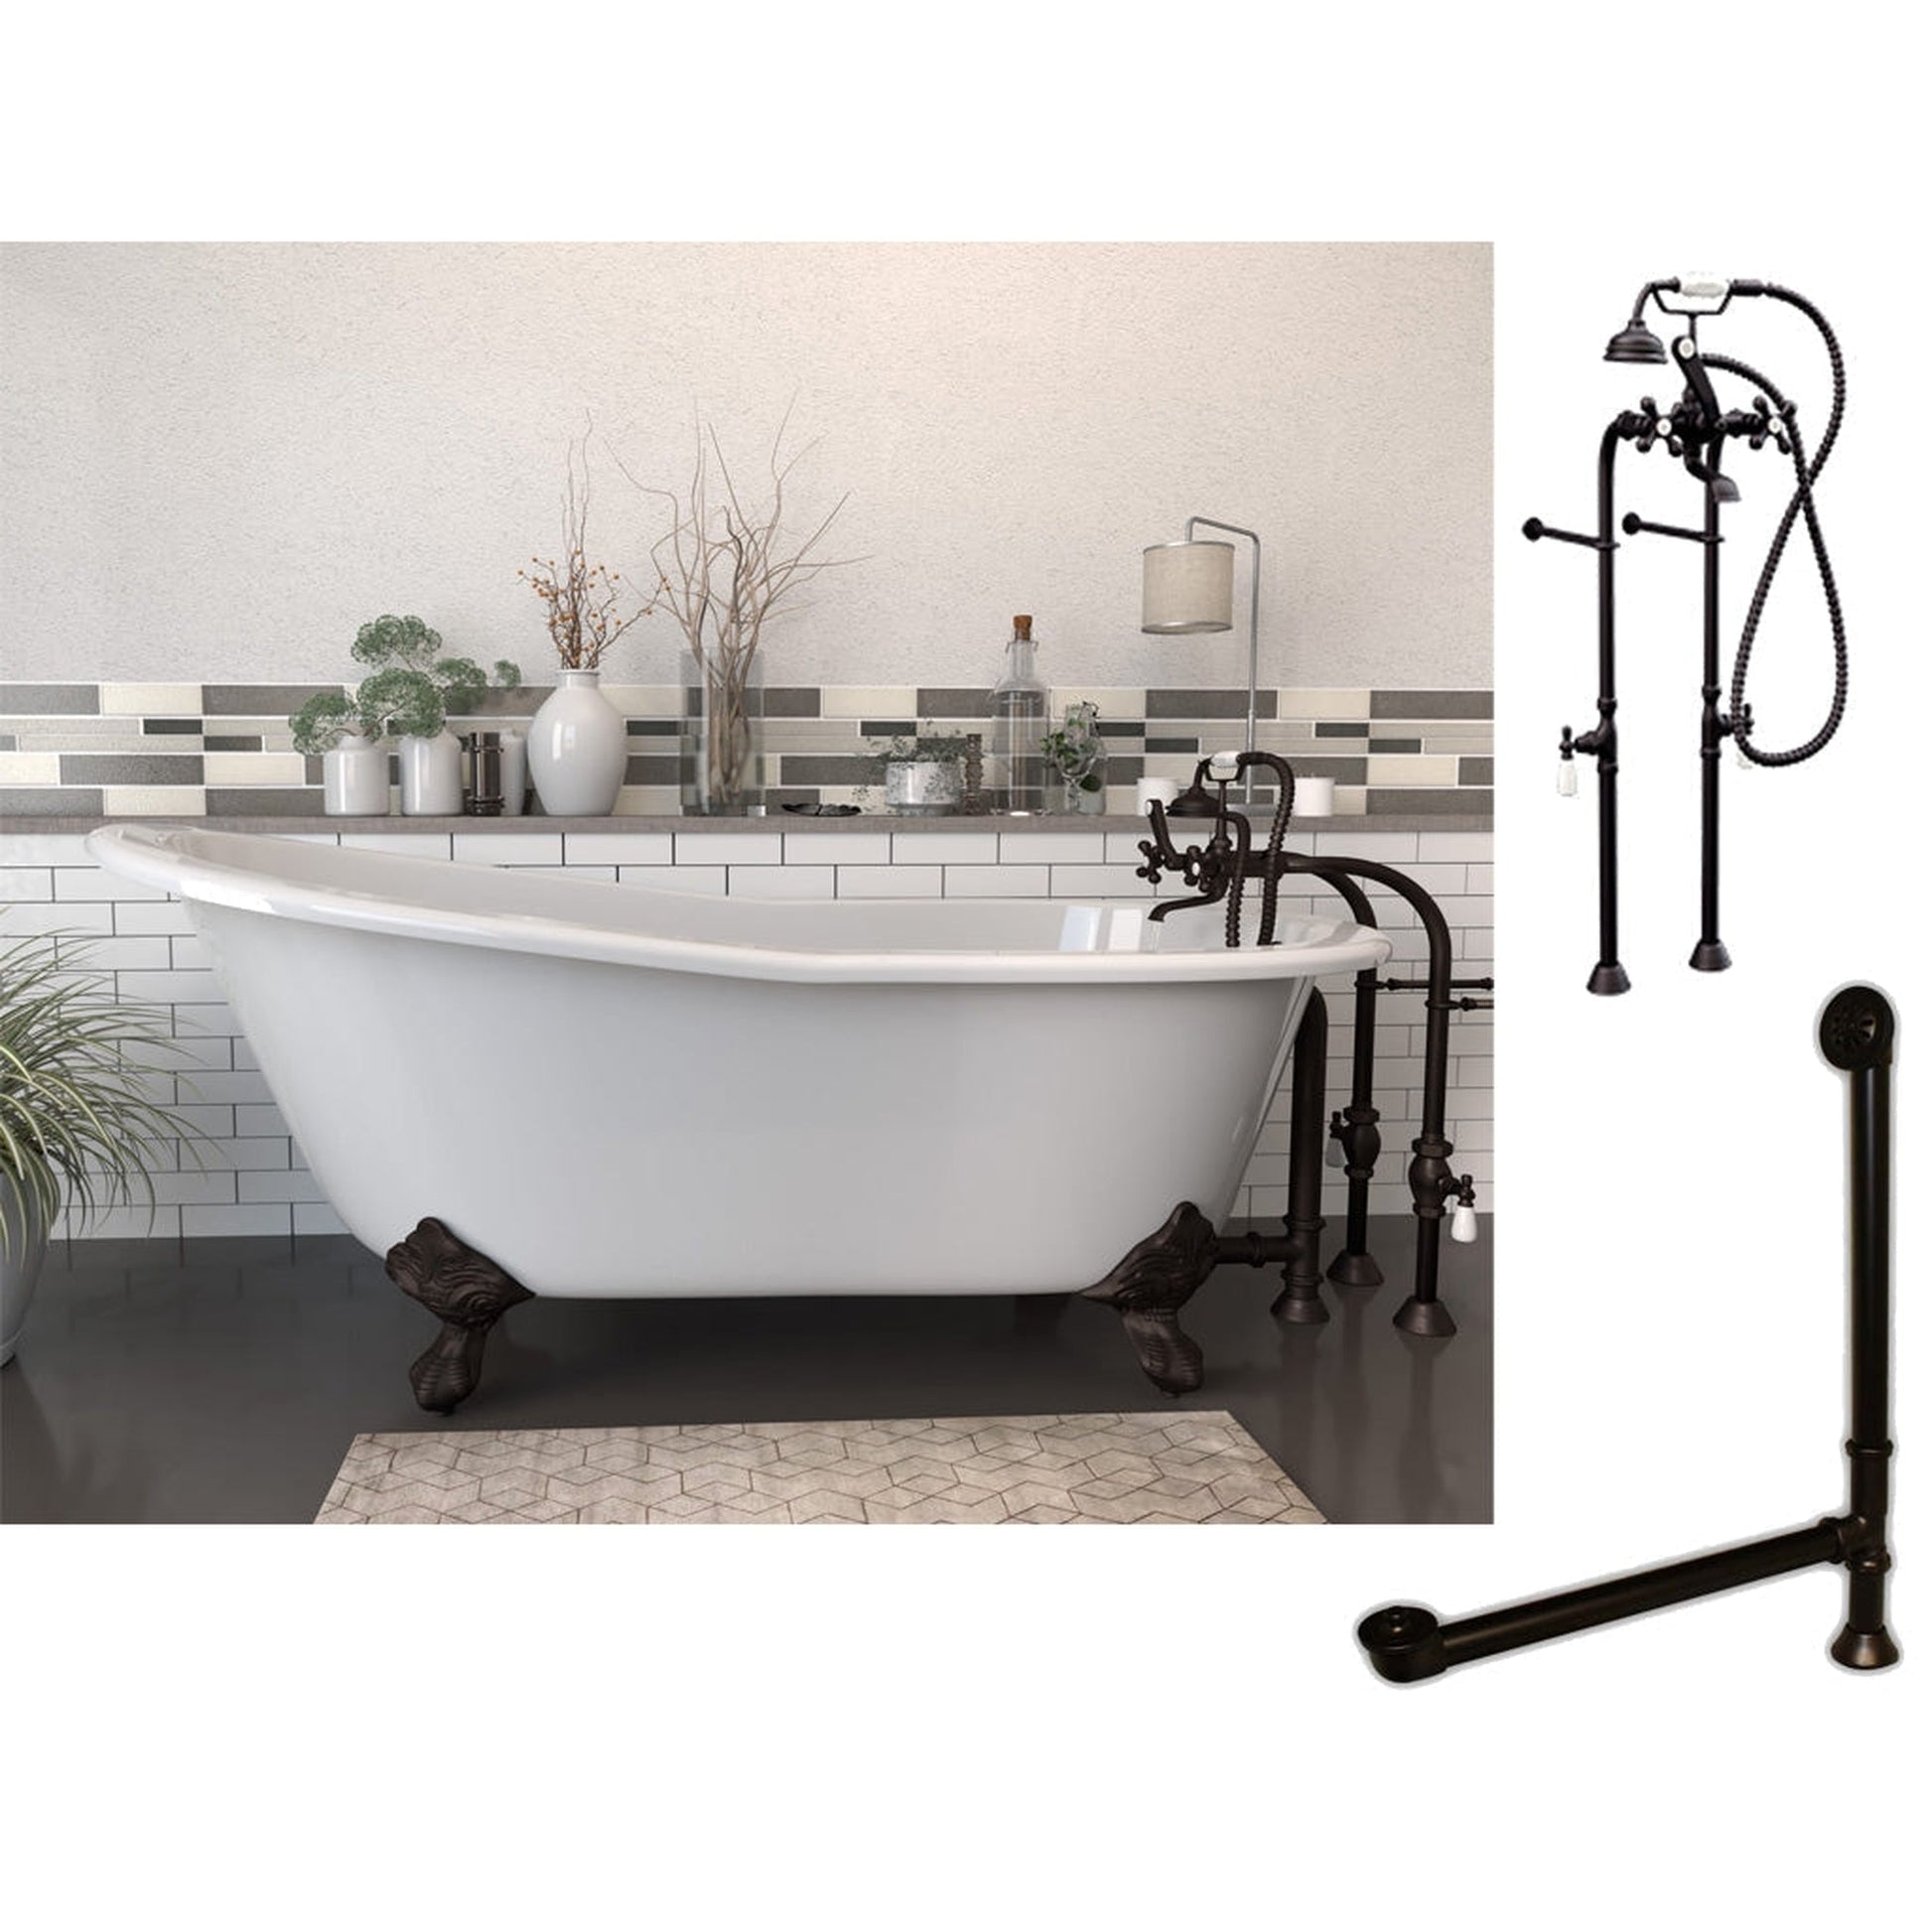 Cambridge Plumbing 67" White Cast Iron Slipper Clawfoot Bathtub With No Deck Holes And Complete Plumbing Package Including Floor Mounted British Telephone Faucet, Drain And Overflow Assembly In Oil Rubbed Bronze